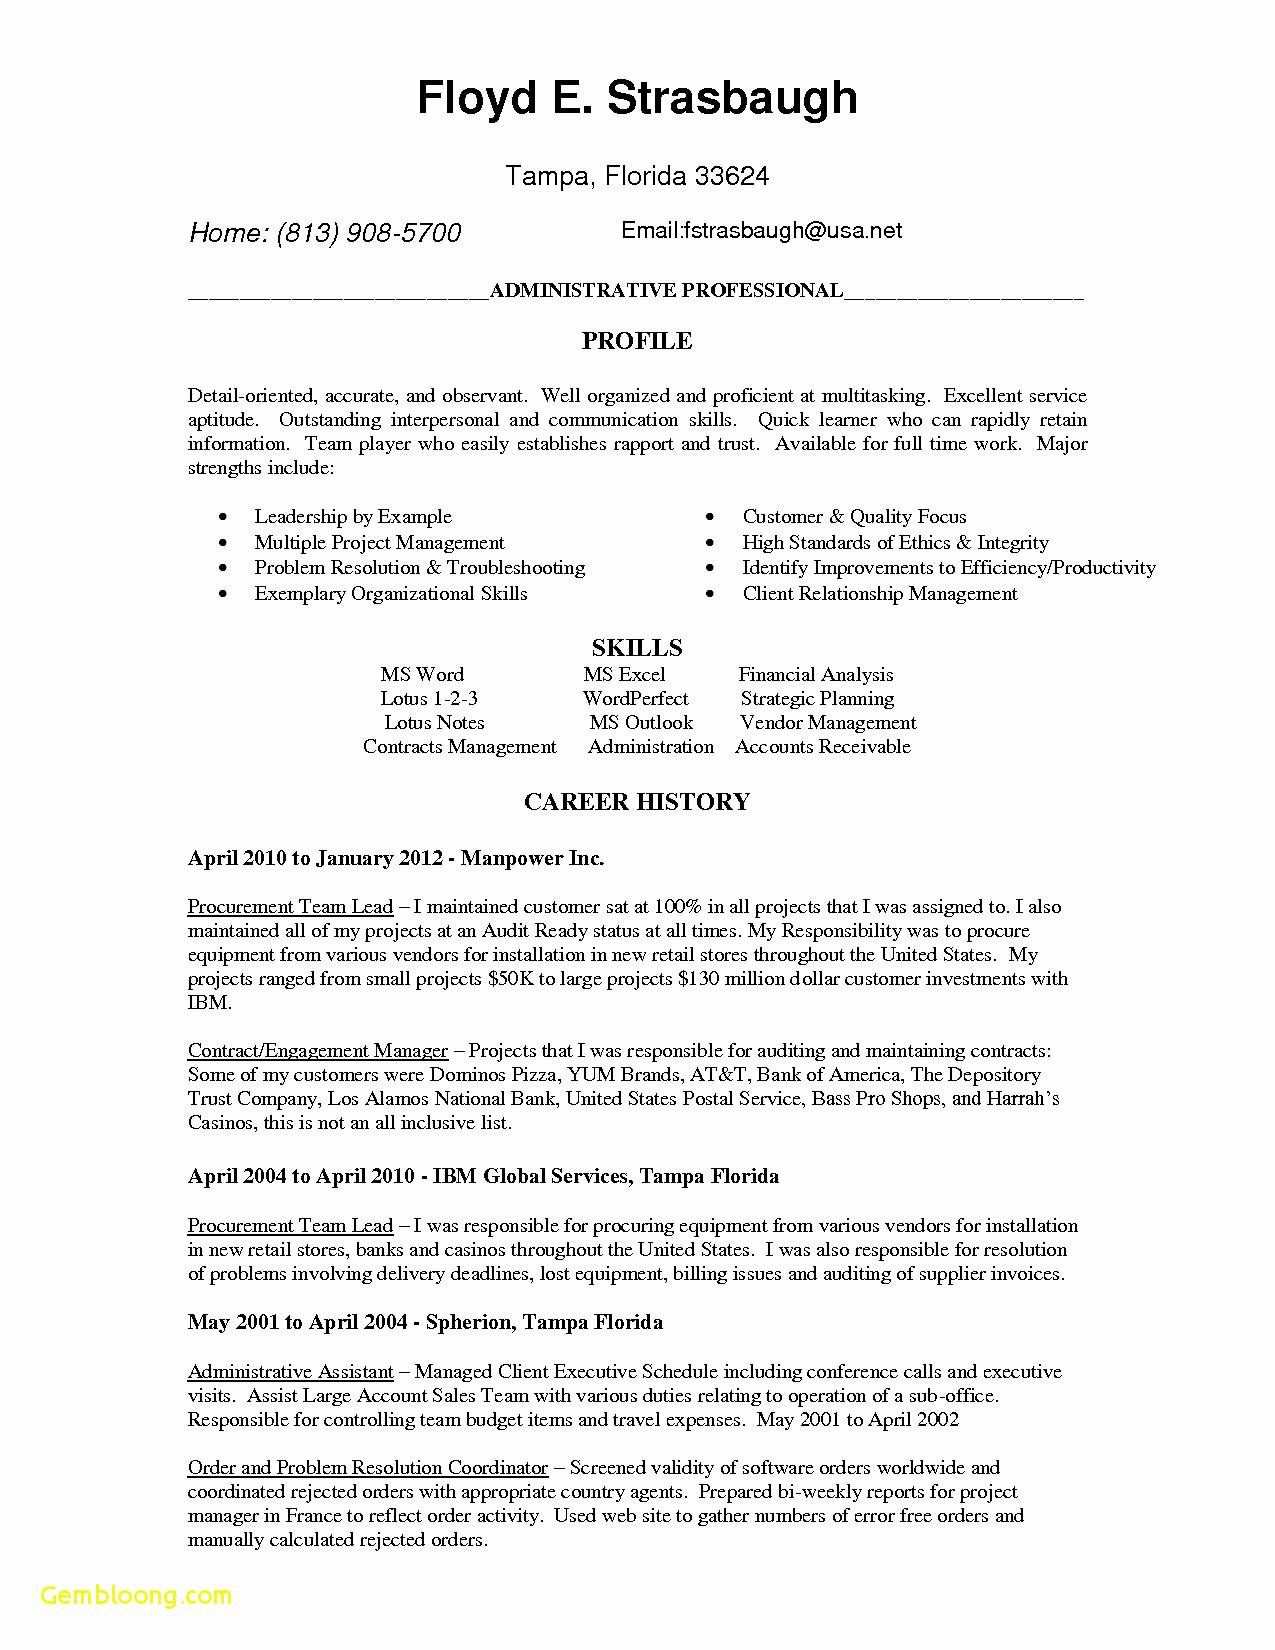 Email Template for Letter Of Recommendation - Cover Letter Sampels Beautiful Resume Templates Sample New